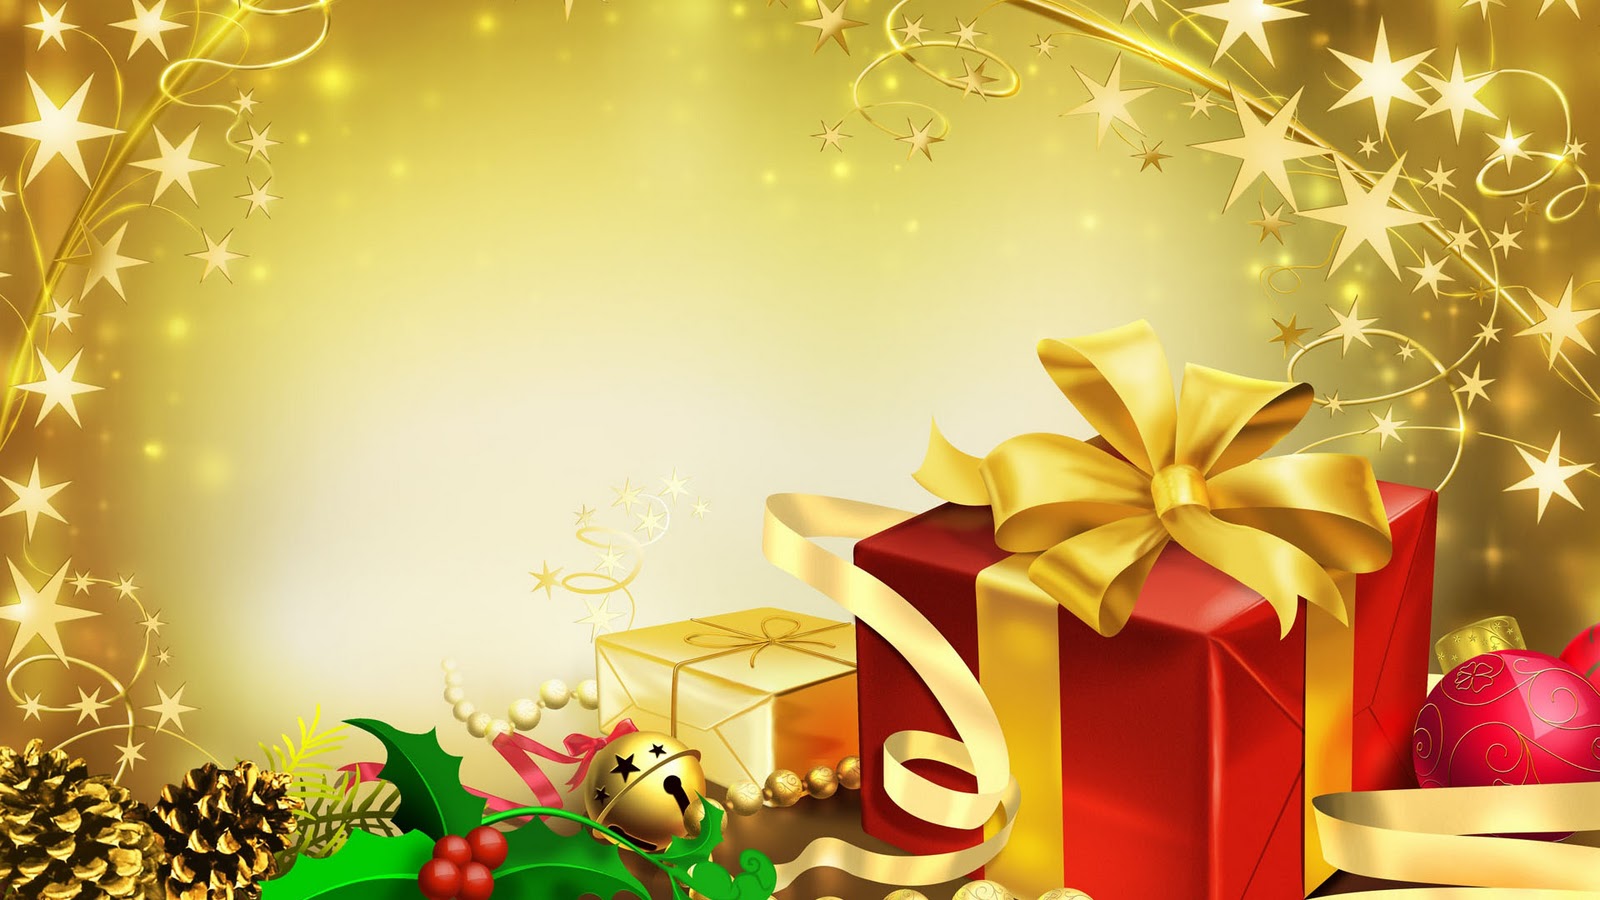 Gifts Border Christmas PPT Backgrounds